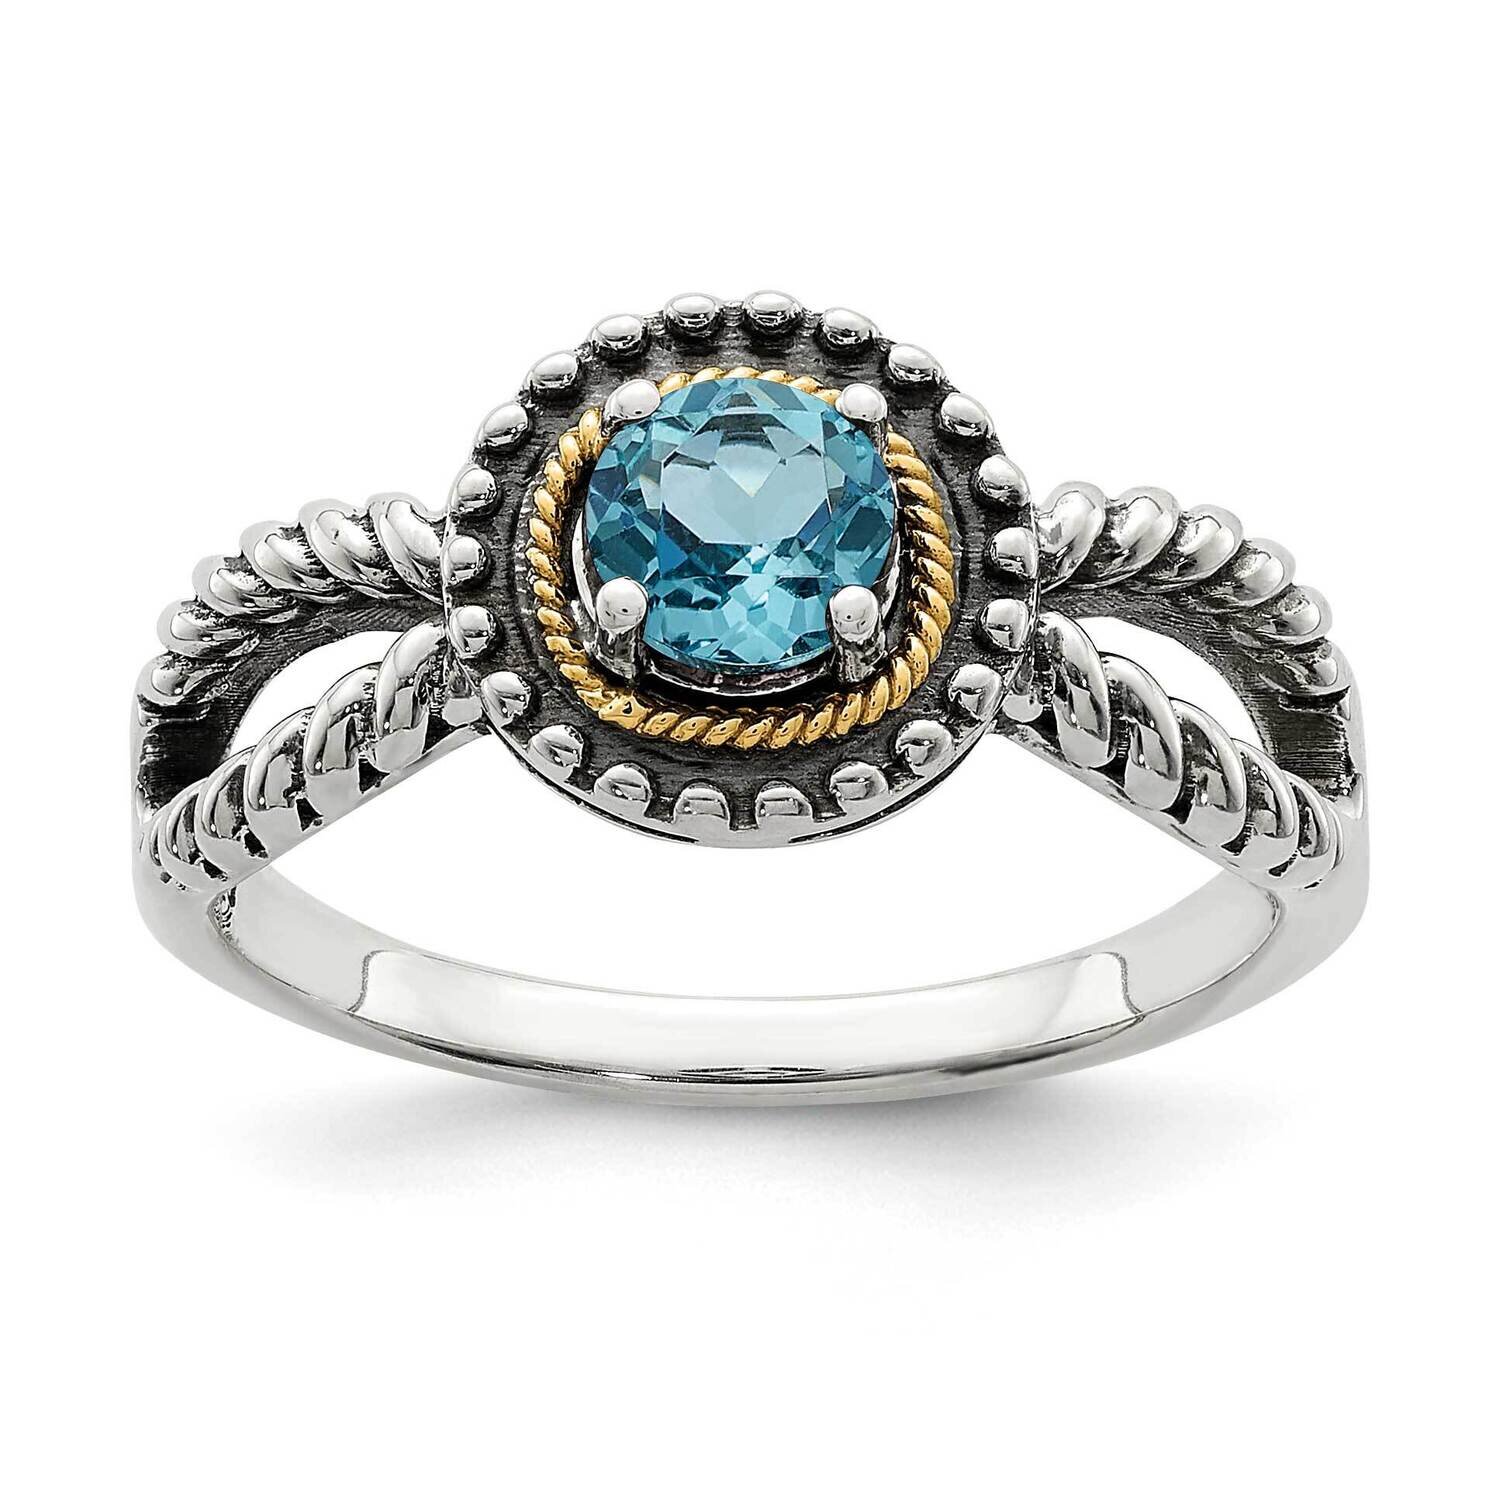 Light Swiss Blue Topaz Ring Sterling Silver with 14k Gold Accent QTC1629